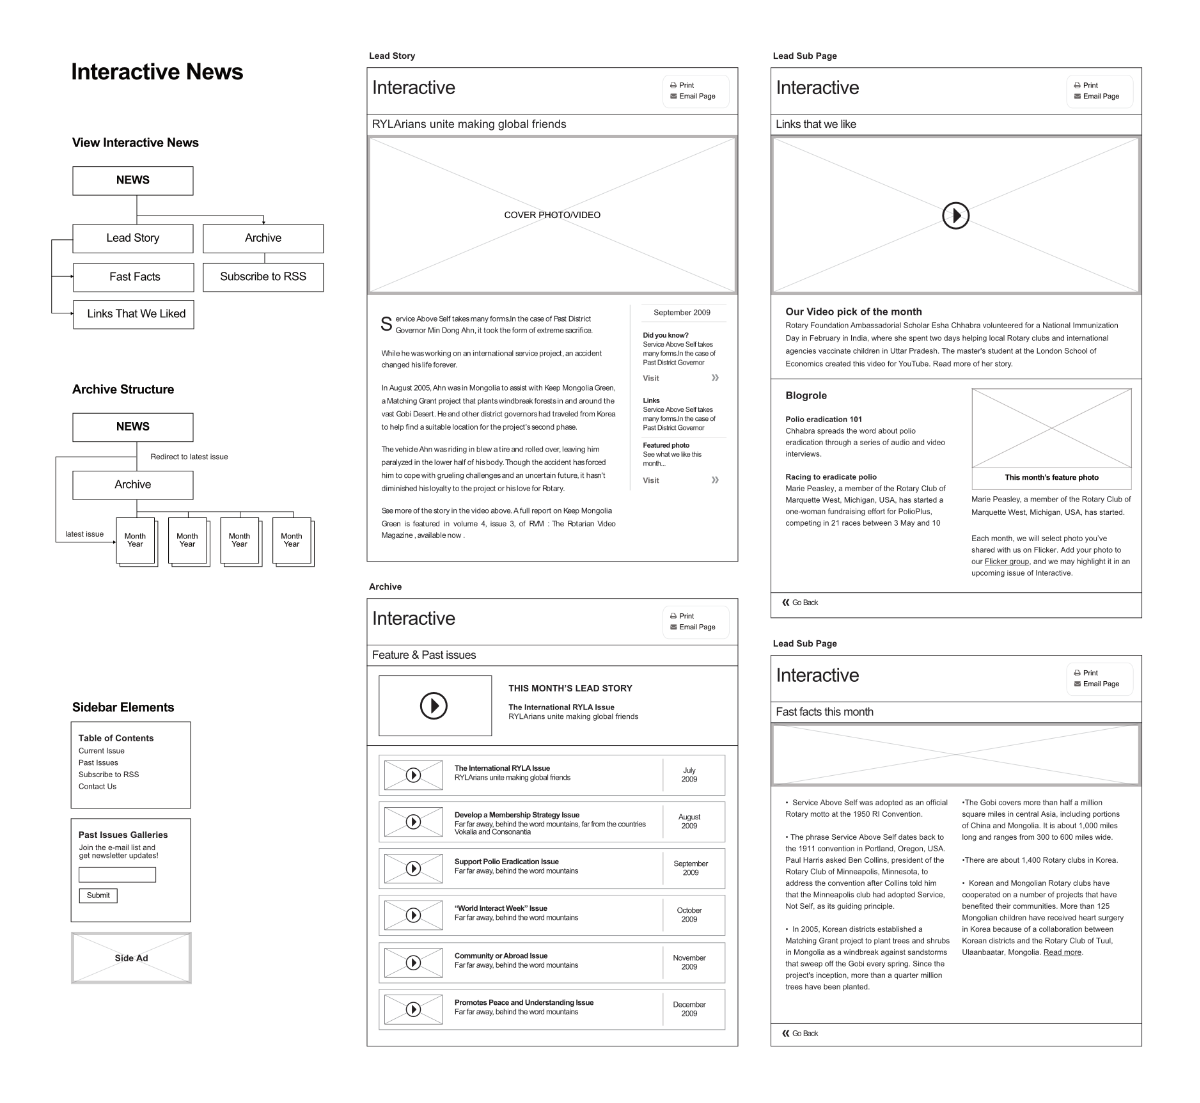 Image of Online News page wireframes.